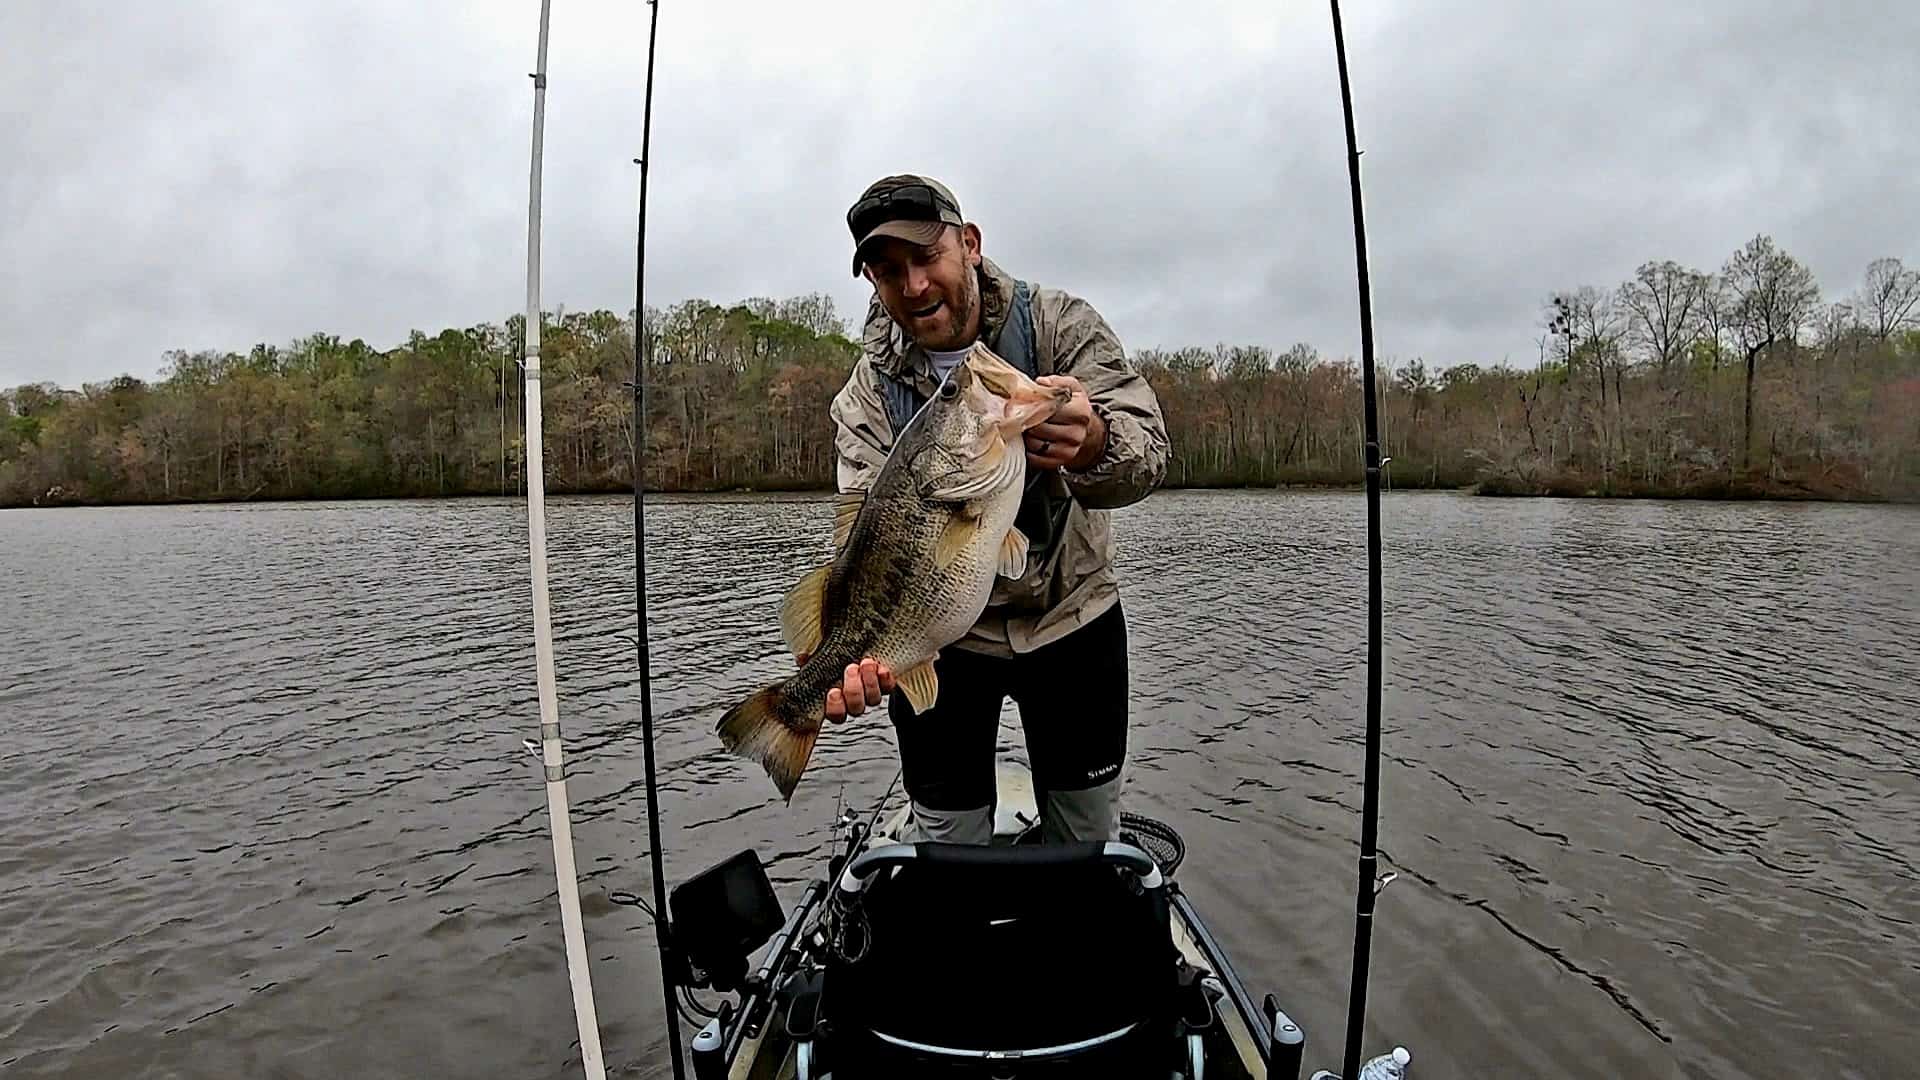 Justin Patrick holding a large mouth bass he caught on his kayak